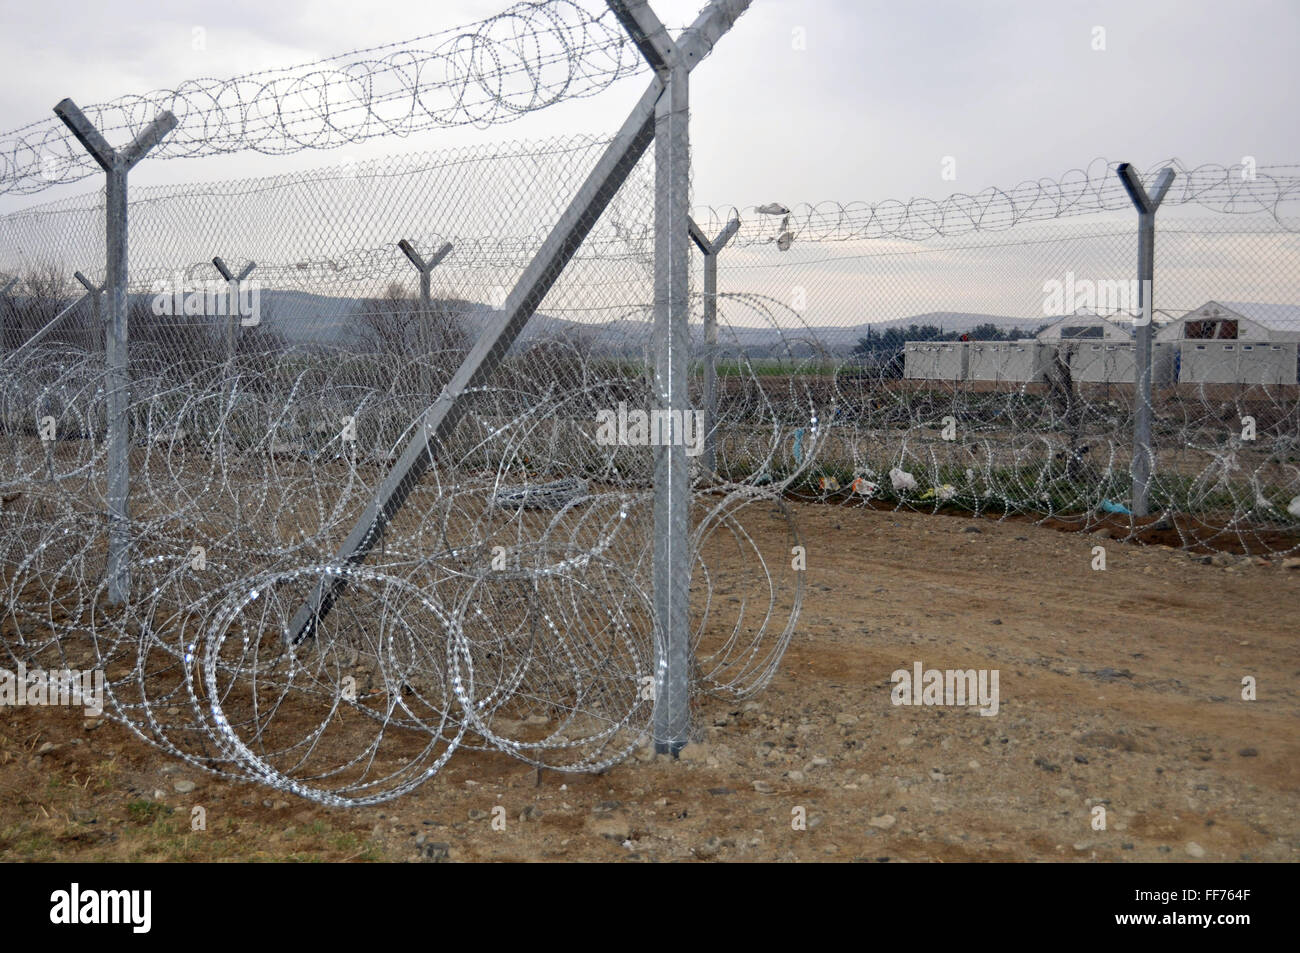 Gevgelija, Macedonia, The Former Yugoslav Republic Of. 10th Feb, 2016. The barbed wire fence at the Greece border, near the southern Macedonia's town of Gevgelija, Wednesday, February 10, 2016. © Anna Francova/CTK Photo/Alamy Live News Stock Photo